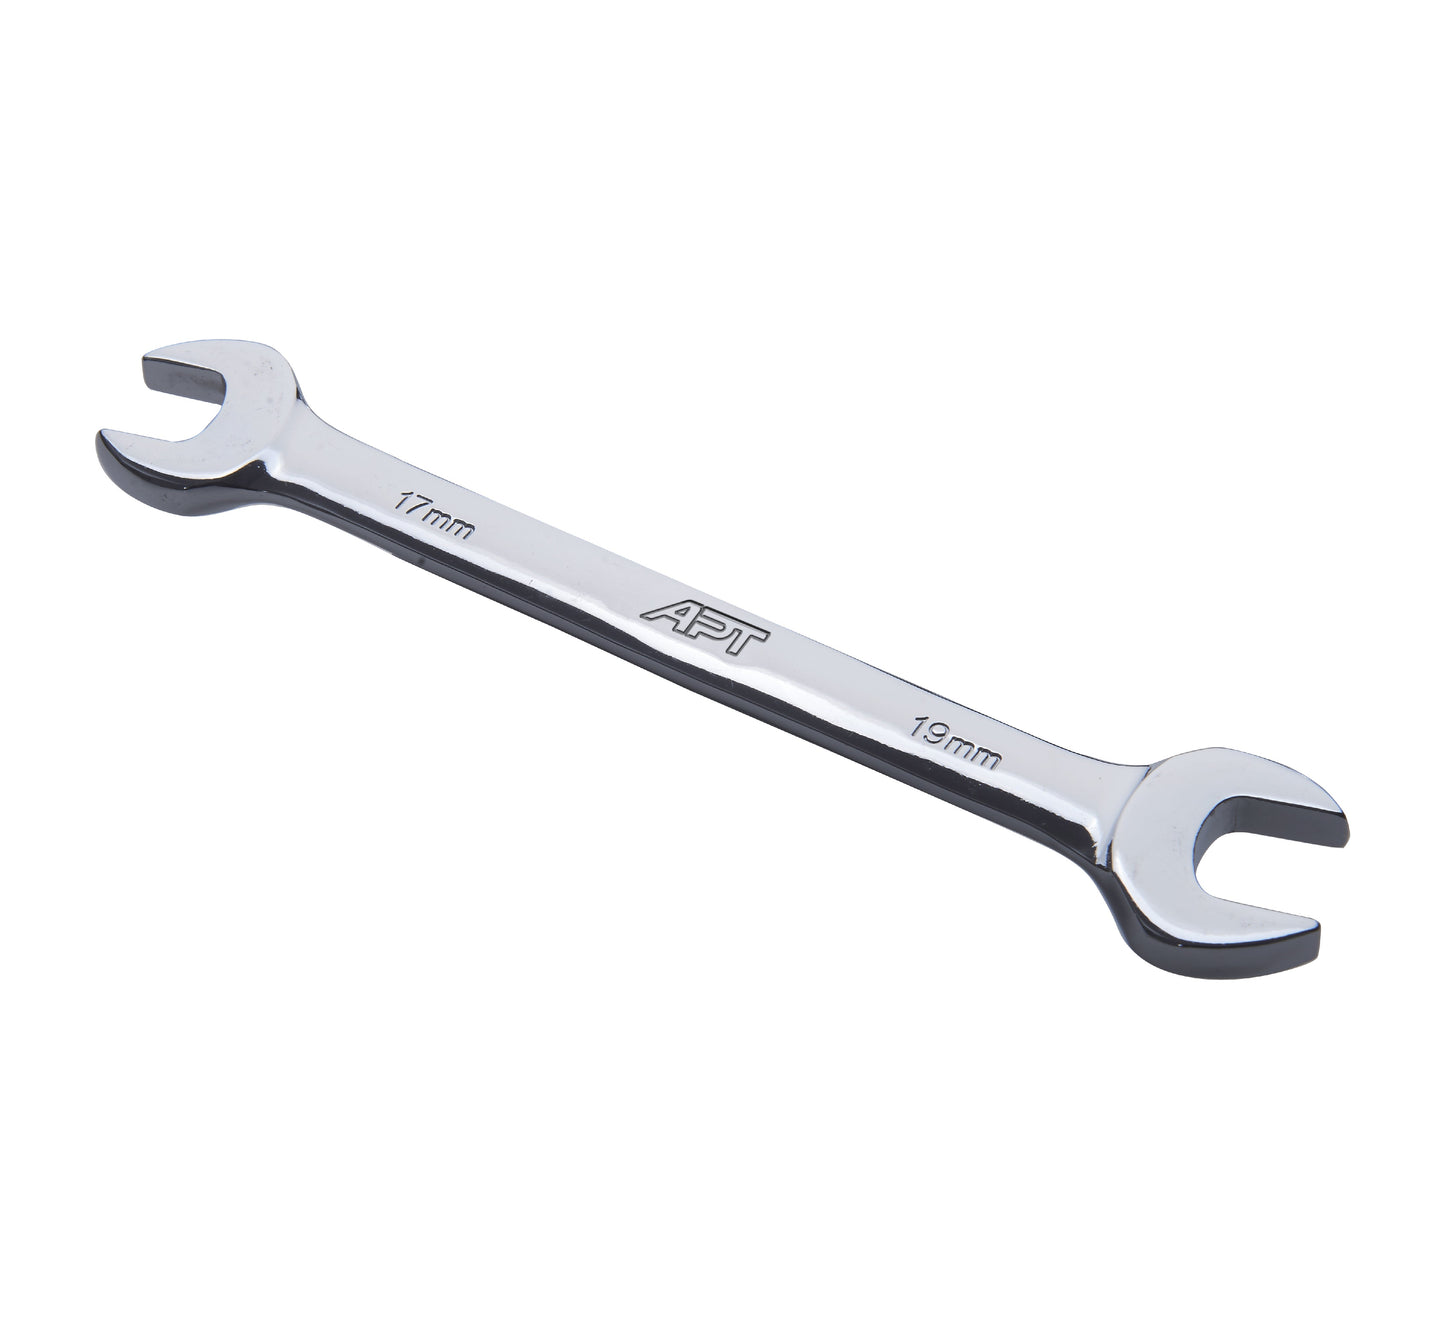 APT DOUBLE OPEN END WRENCH BRIGHT SATIN FINISH PP CARD HOLDER CR-V 36X41MM-DW251401-36X41